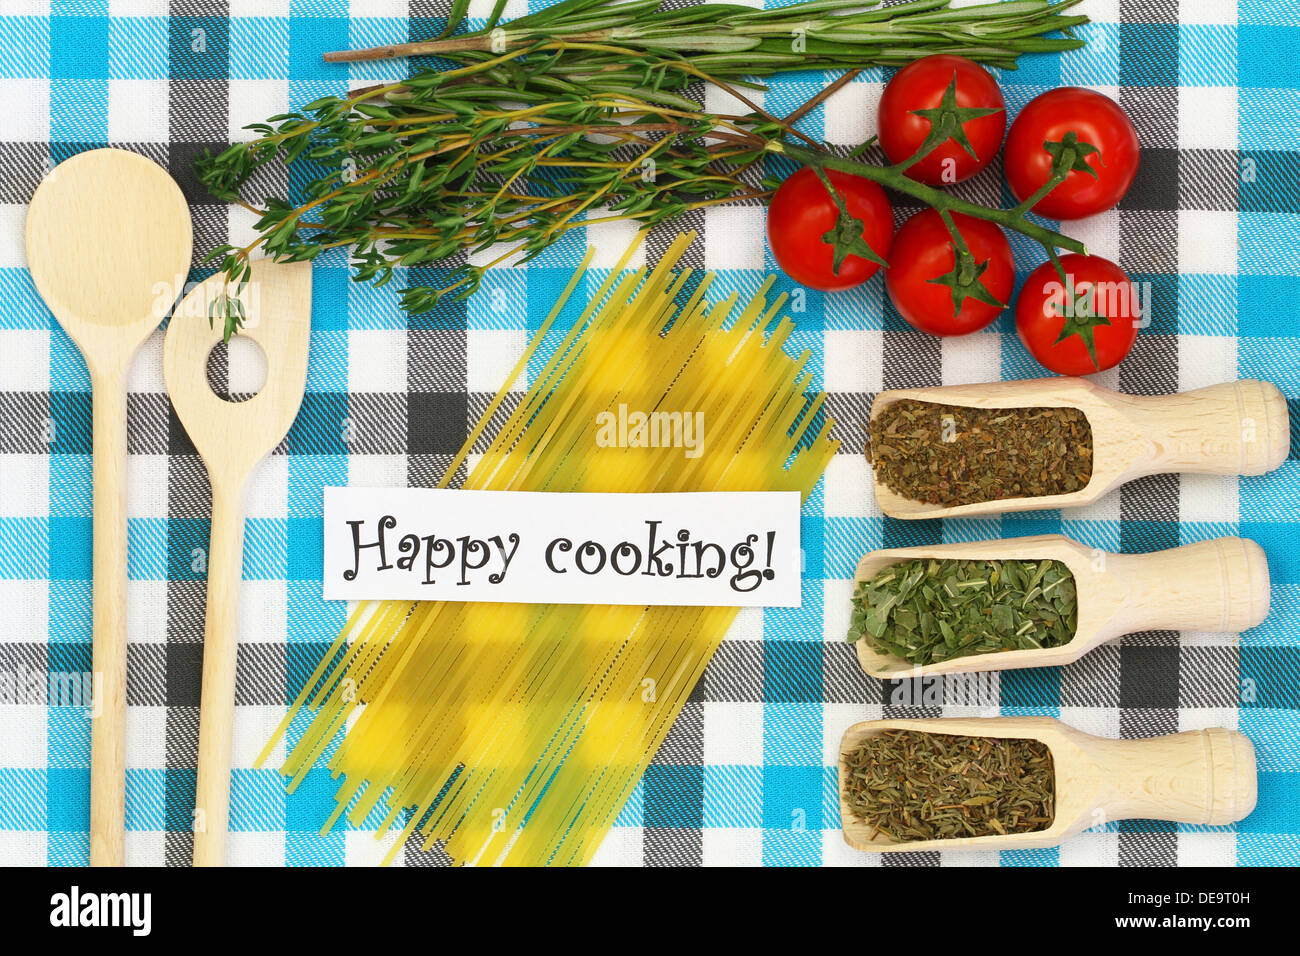 Happy cooking card with selection of herbs, ingredients and kitchen utensils on checkered tablecloth Stock Photo